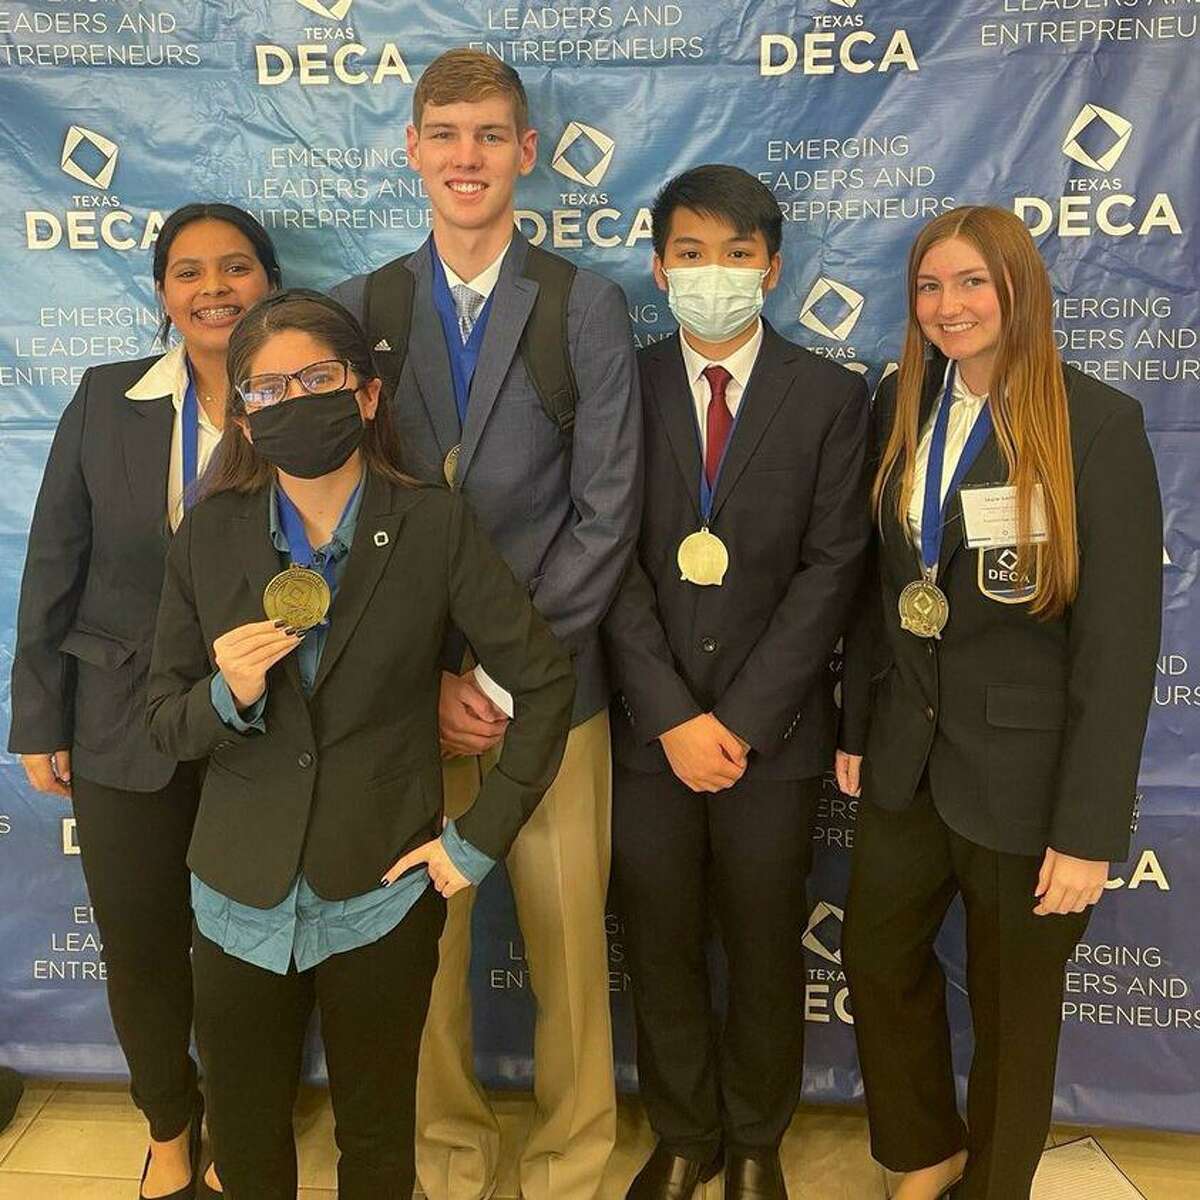 Pearland High School students are headed to the DECA State Career Development Conference Feb. 24-26 in Houston after success at a district competition in January. Courtesy Pearland Independent School District.